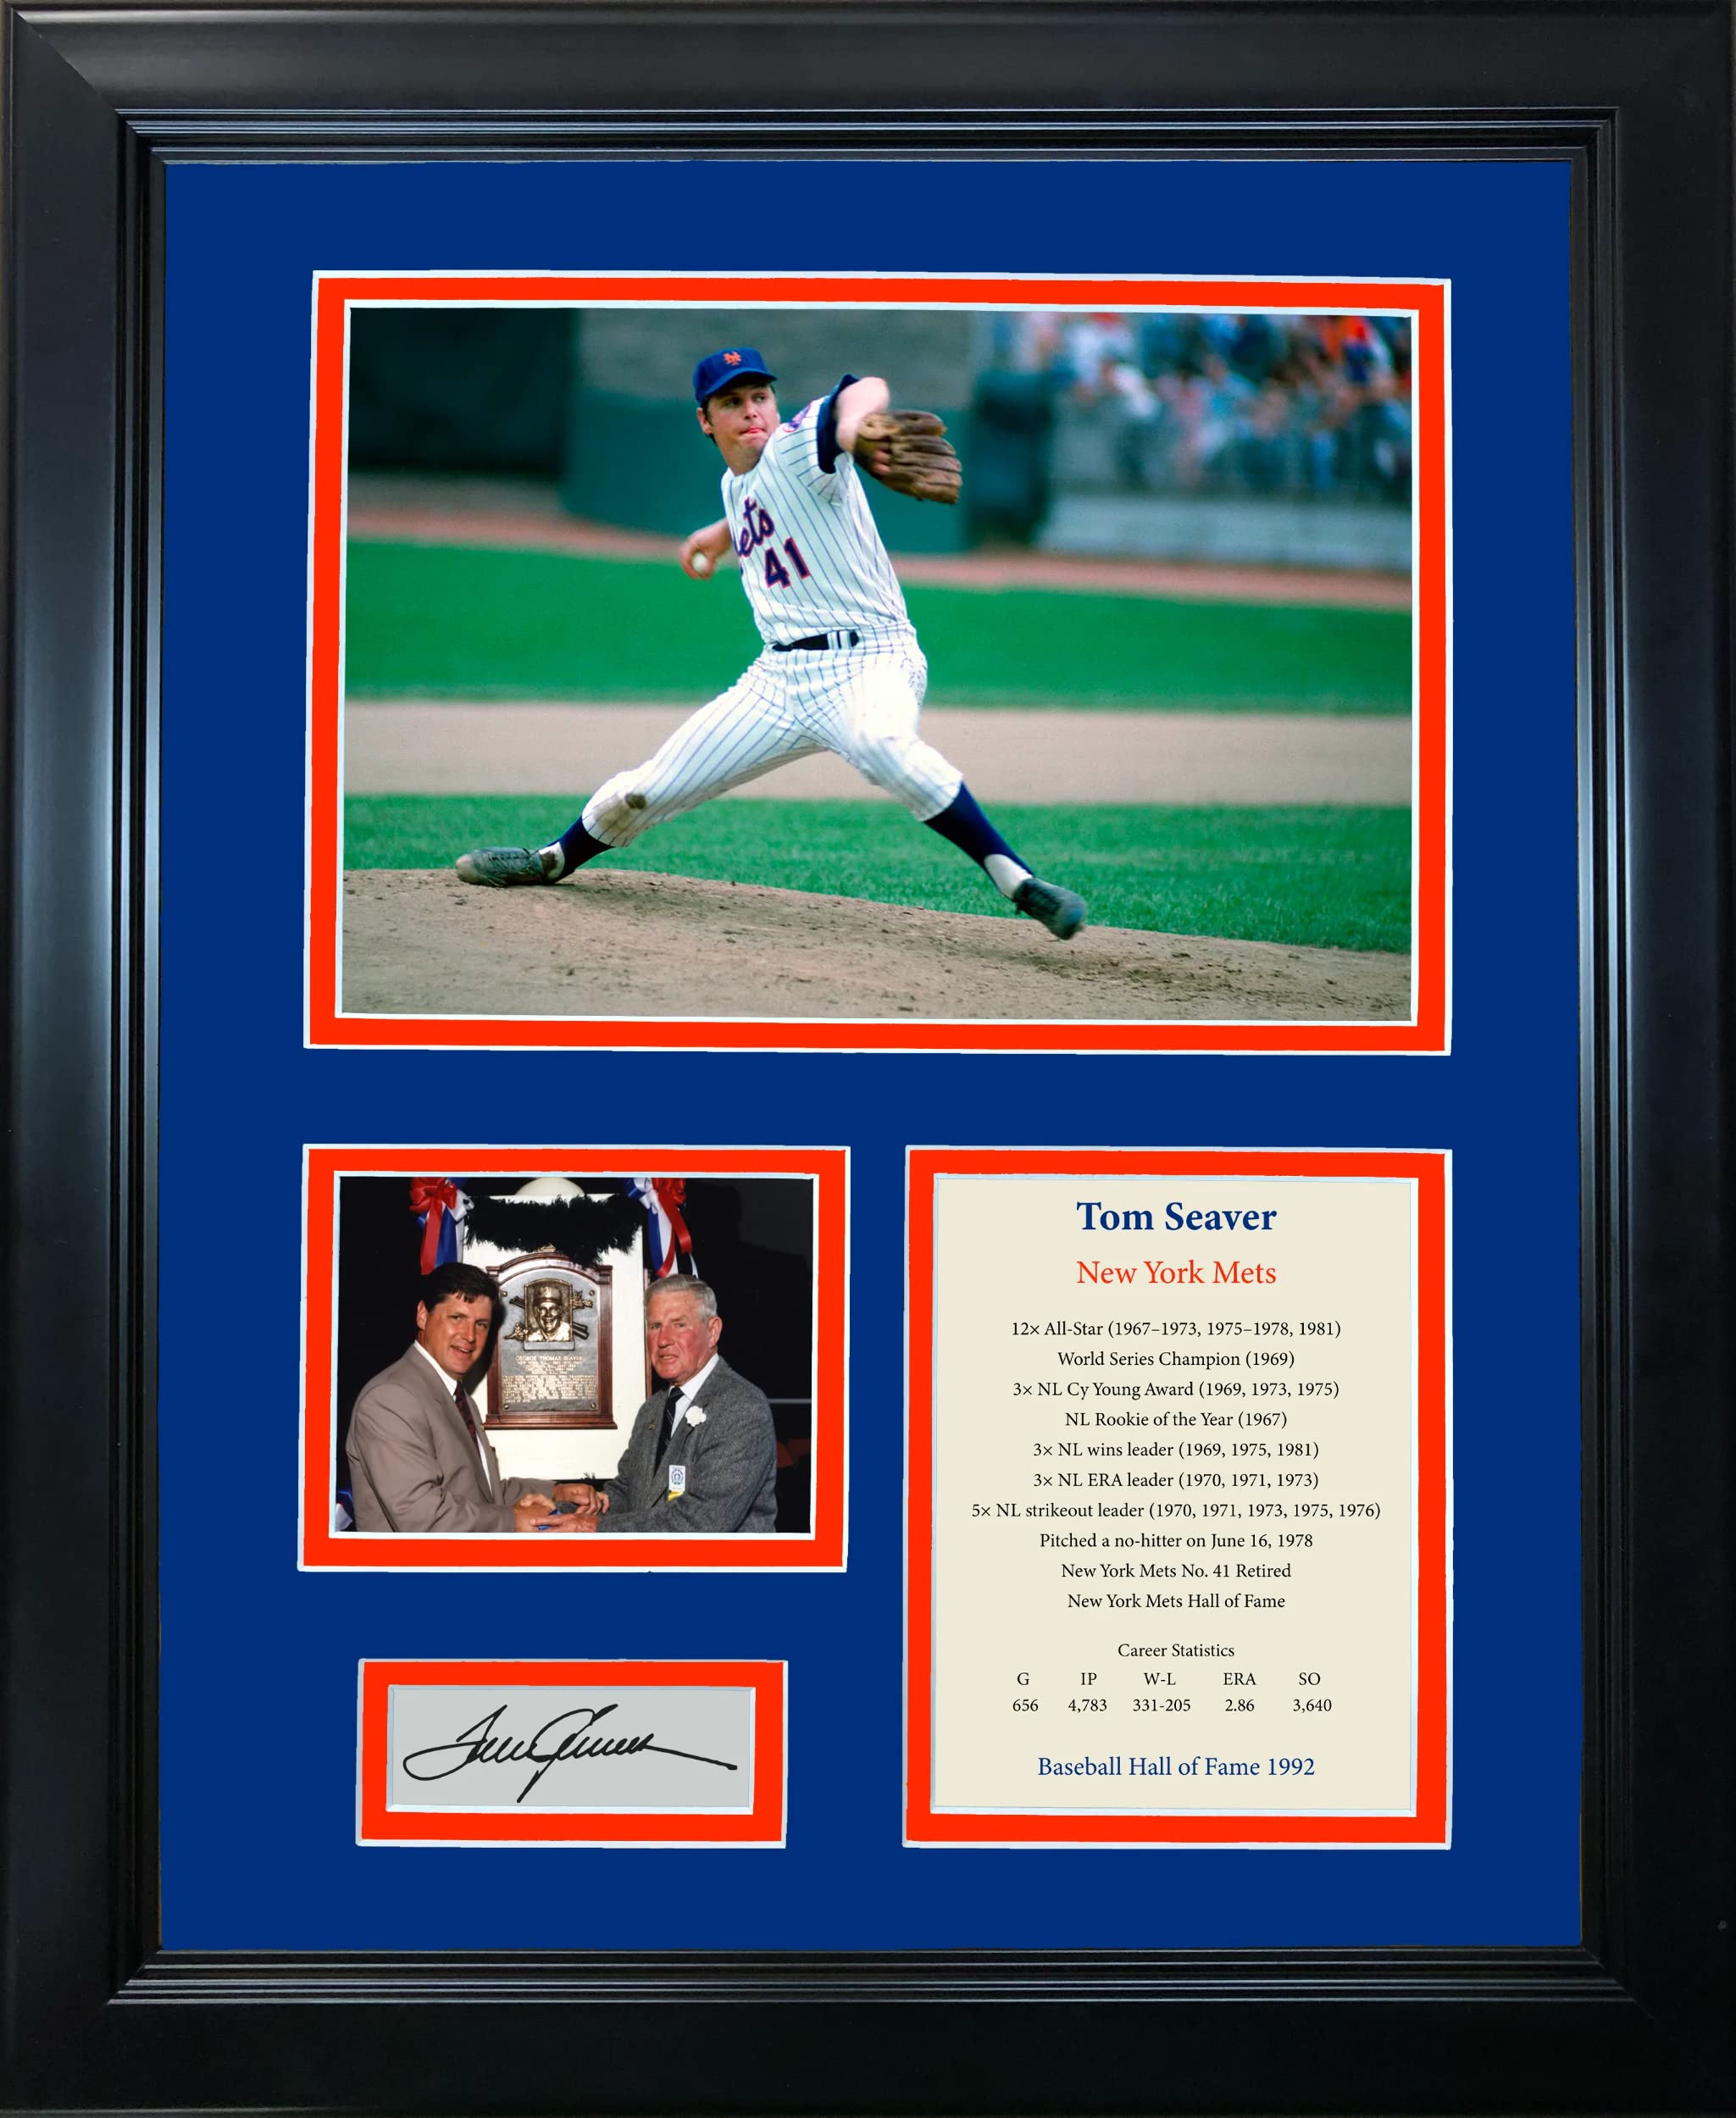 Framed Tom Seaver Hall of Fame Facsimile Laser Engraved Signature Auto New York Mets Baseball 12"x15" Photo Collage